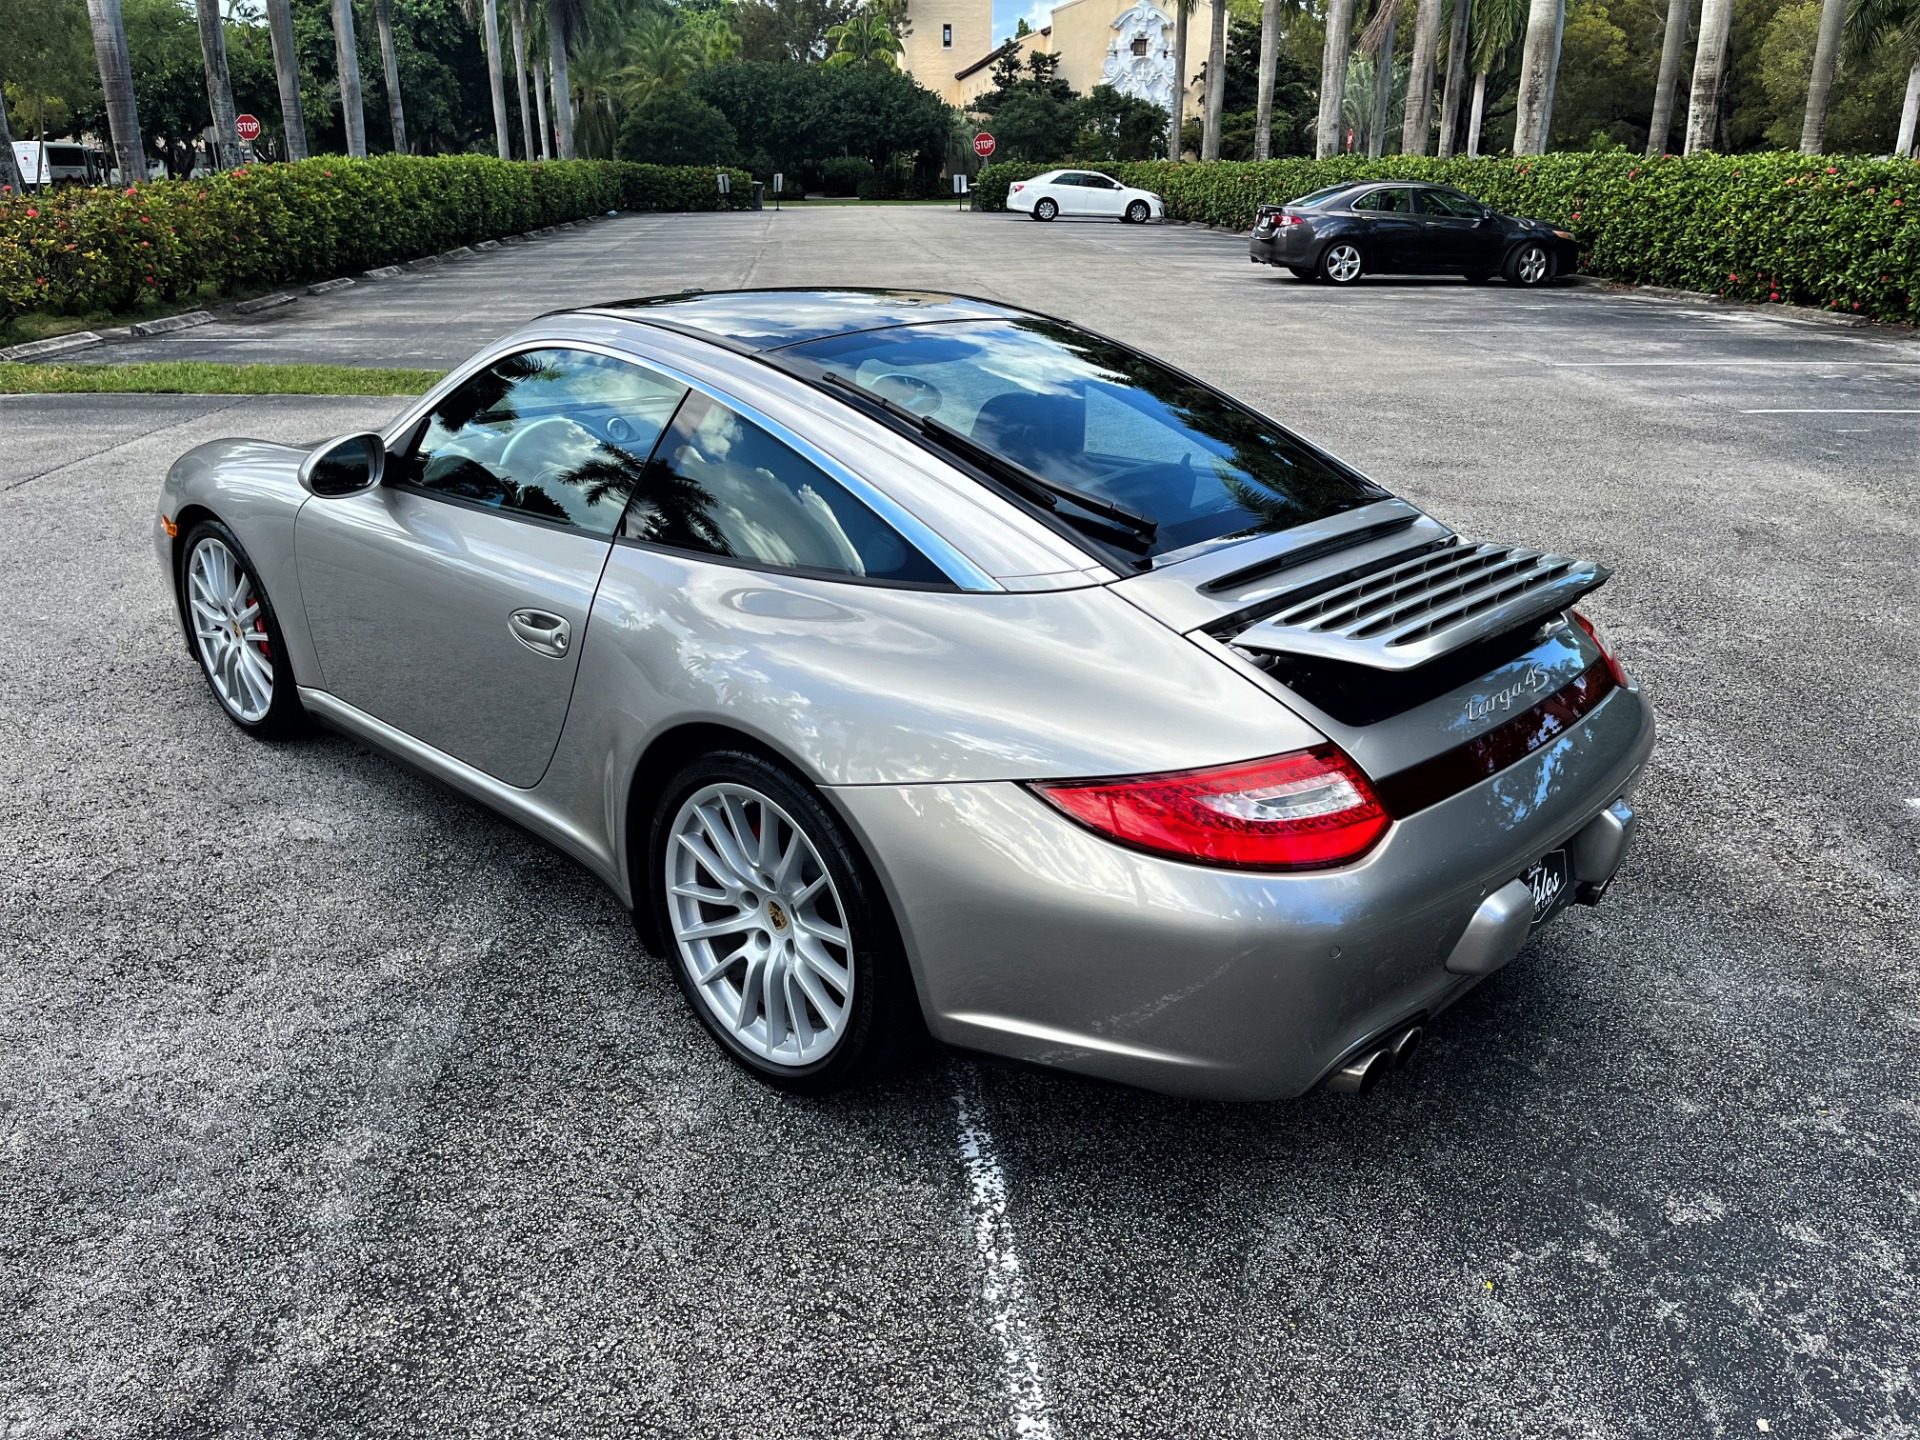 Used 2011 Porsche 911 Targa 4S for sale $85,850 at The Gables Sports Cars in Miami FL 33146 1